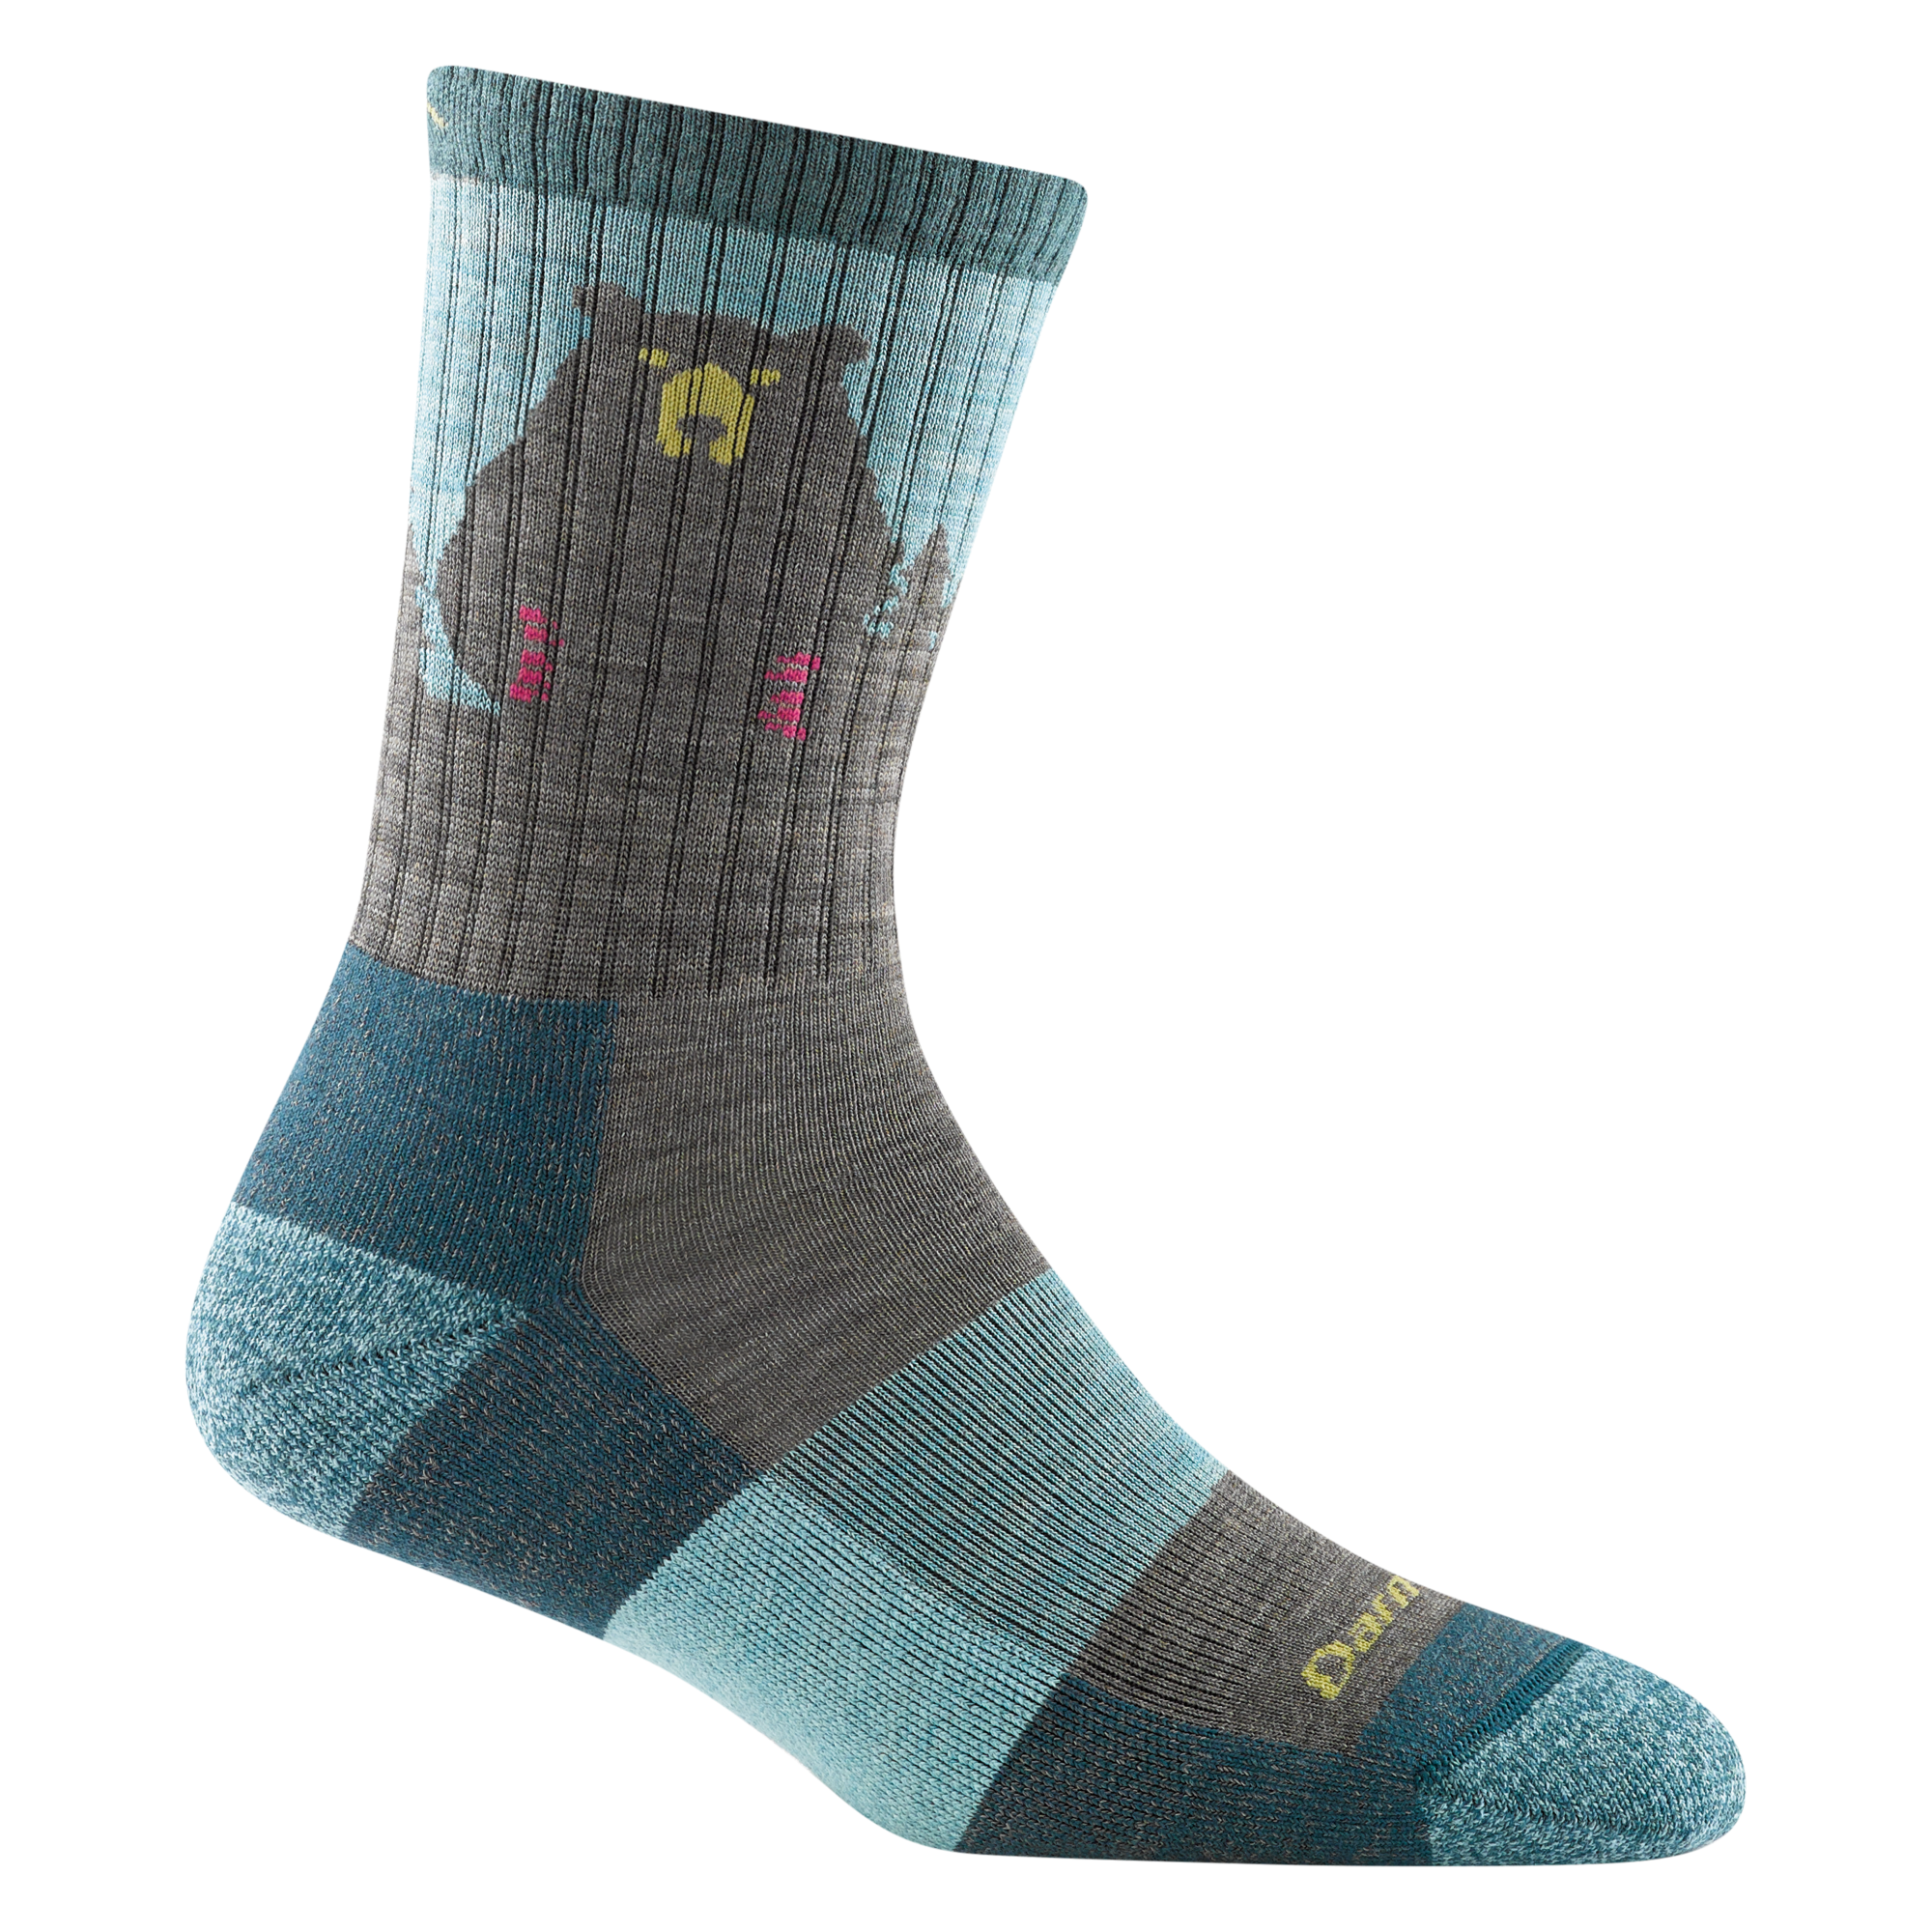 1970 women's bear town micro crew hiking sock in color aqua with light blue toe/heel accents and gray bear design on calf